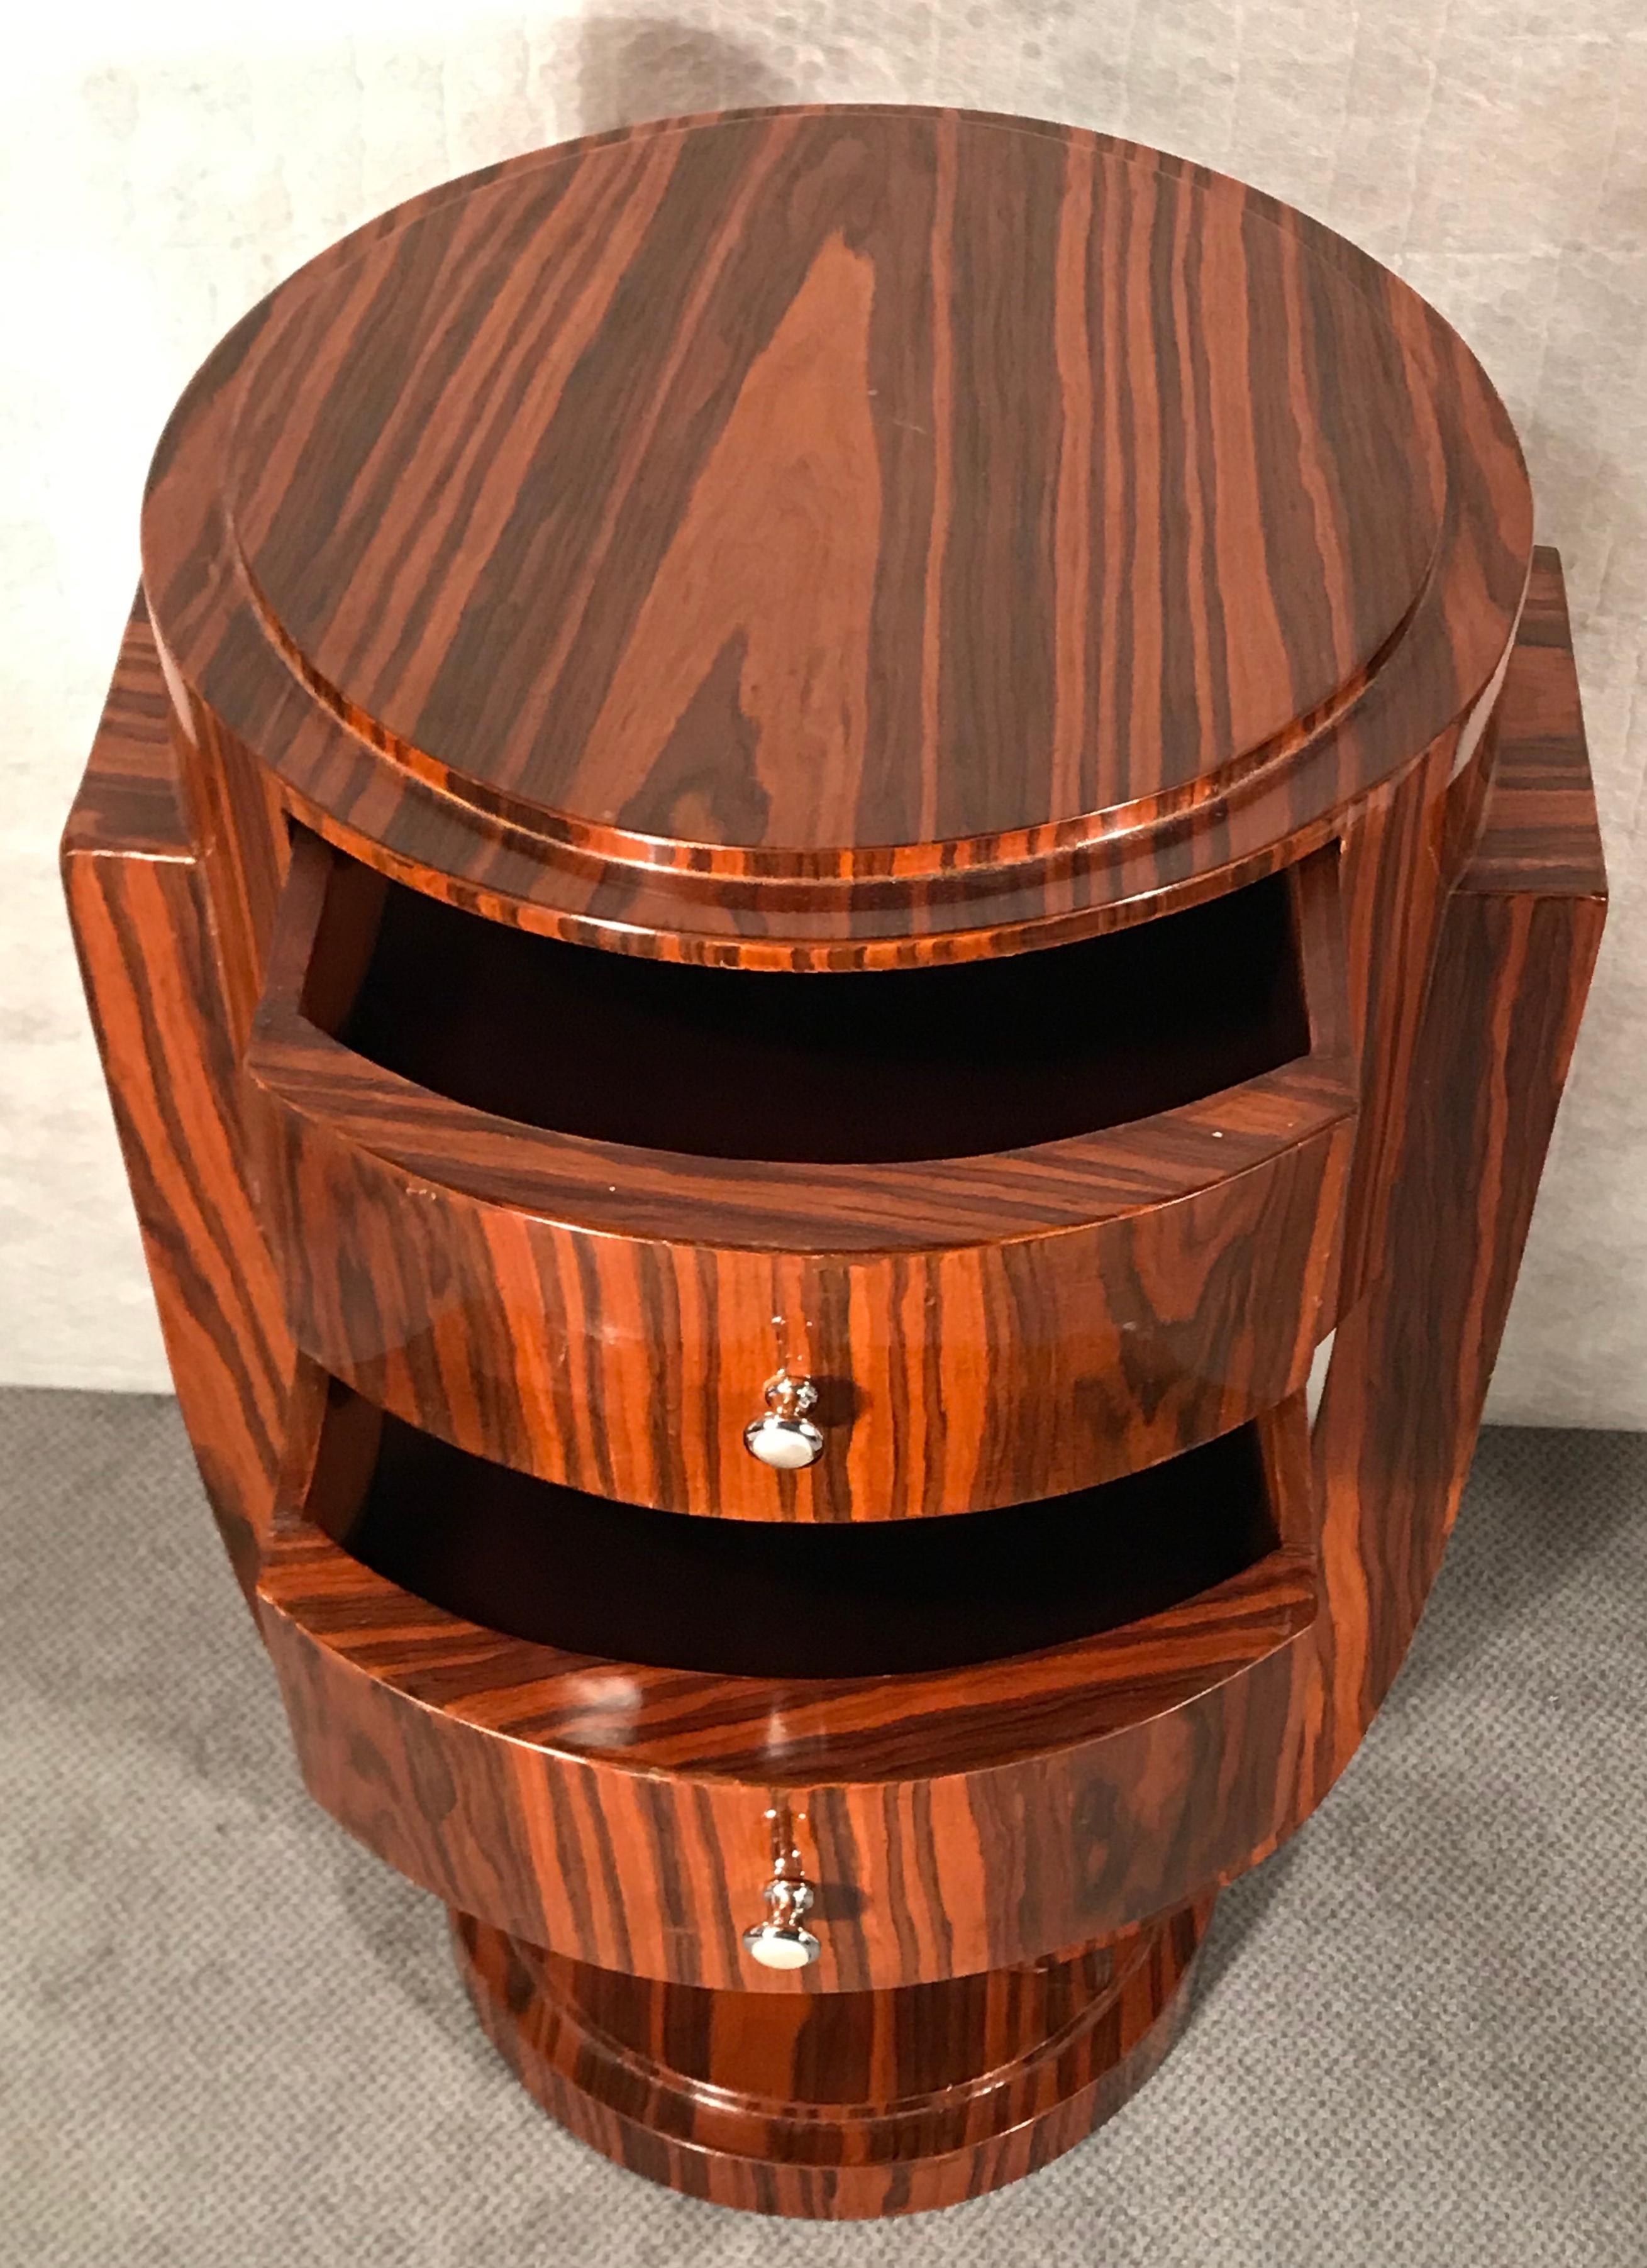 Art Deco side table, France 1920-1930. This beautiful original Art Deco side table was made circa 1920-1930 in France. The elegant design of the two drawer table is embellished with an exquisite Makassar ebony wood veneer.

Art Deco, short for